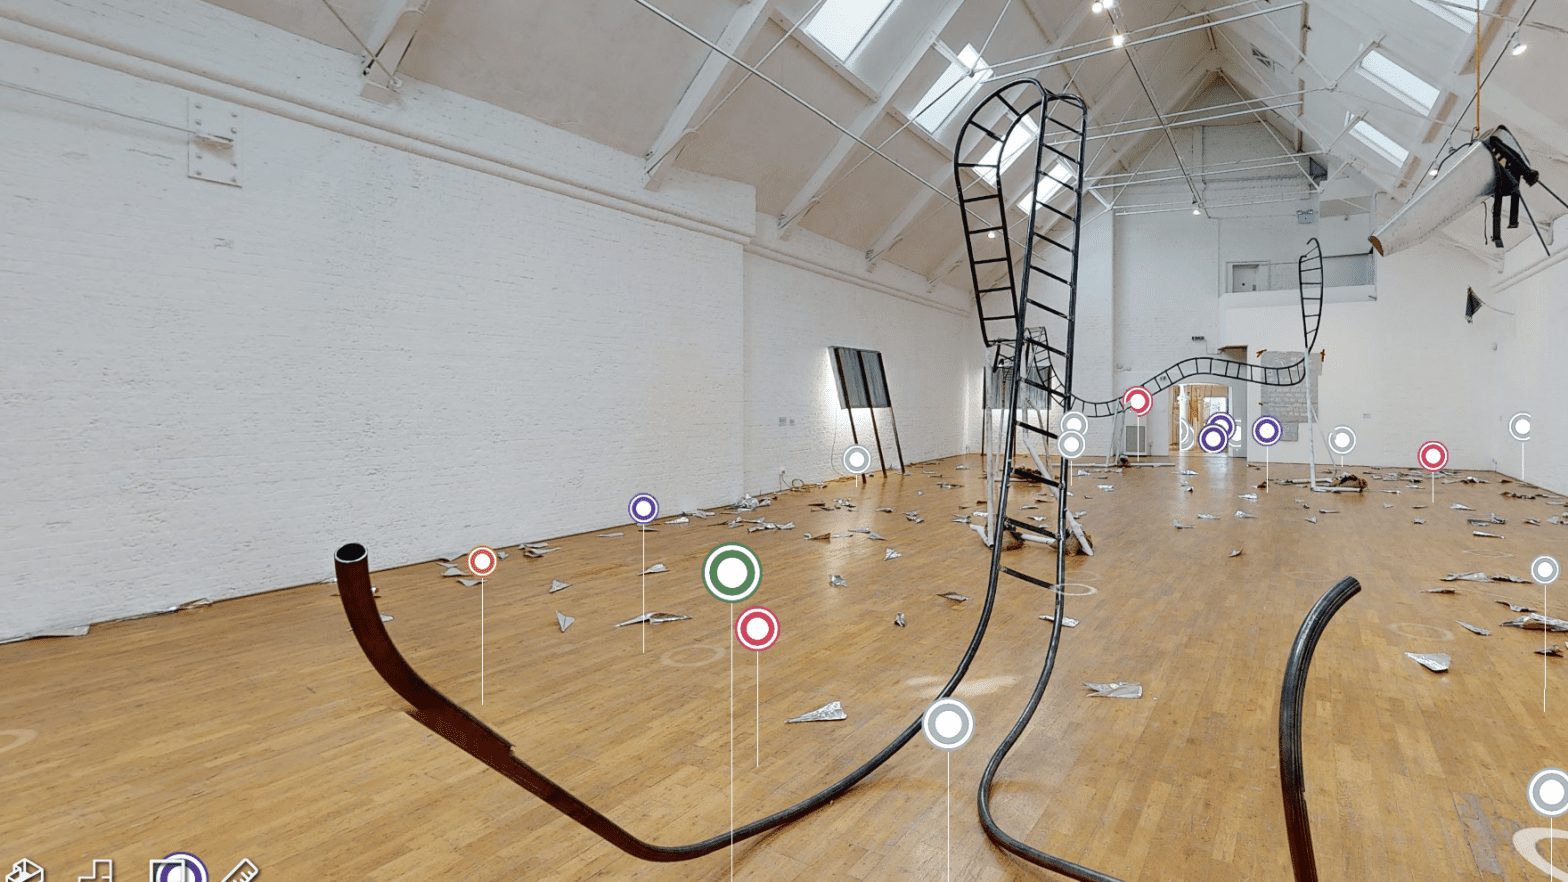 Screenshot of the virtual exhibition of Jesse Darling: No Medals No Ribbons at Modern Art Oxford. A large steel sculpture that looks like a large unbalanced ladder or rollercoaster fills the main gallery. There are coloured tags dotted across the space.